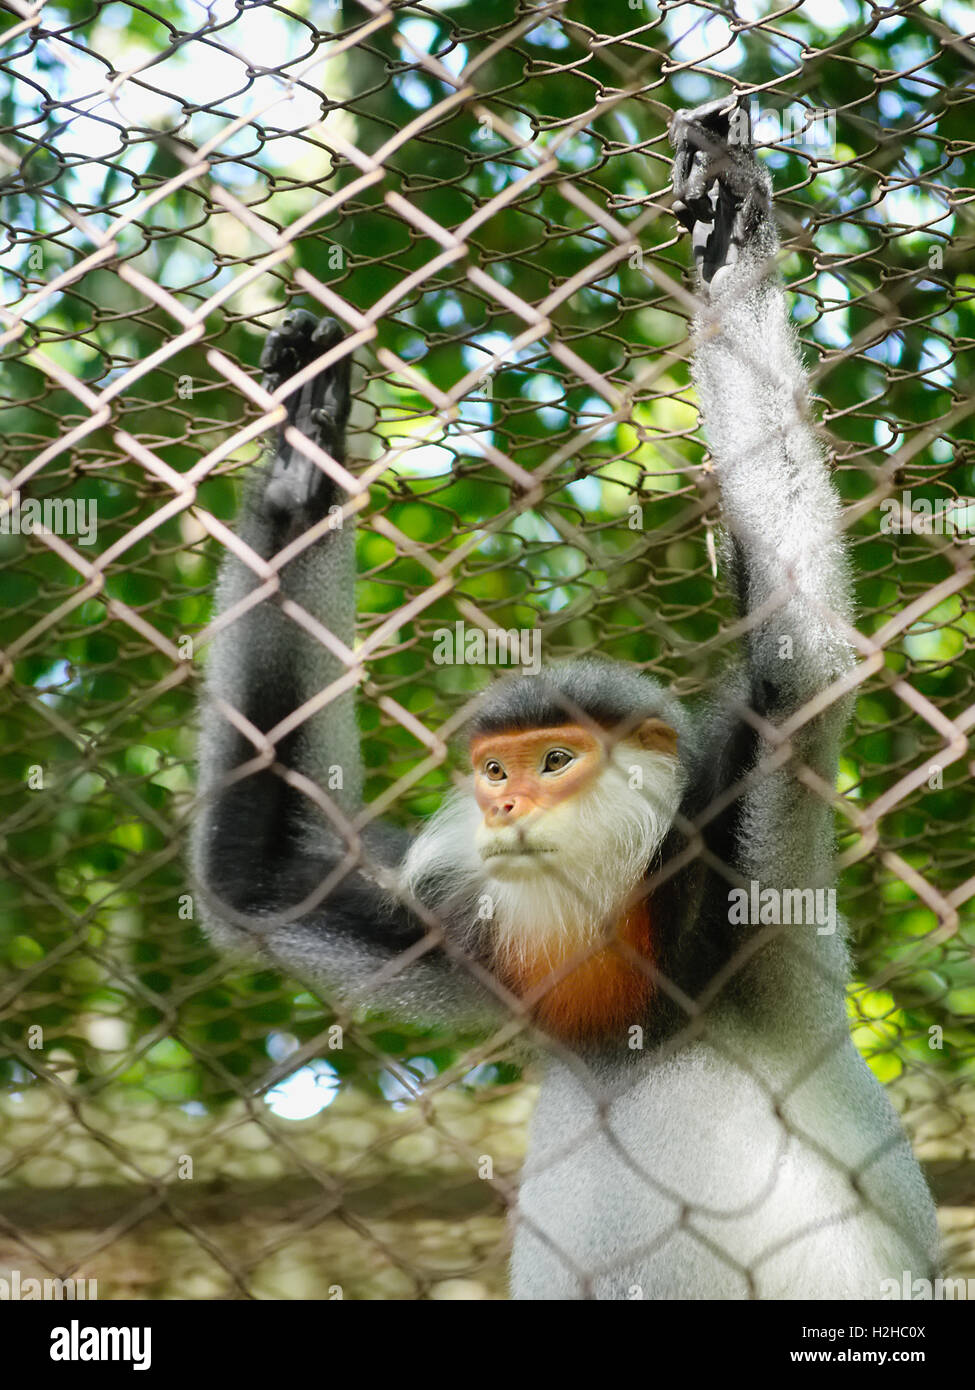 Captive red-shanked douc langur (Pygathrix nemaeus) in a cage at the endangered primate rescue center in Cuc Phuong, Vietnam Stock Photo